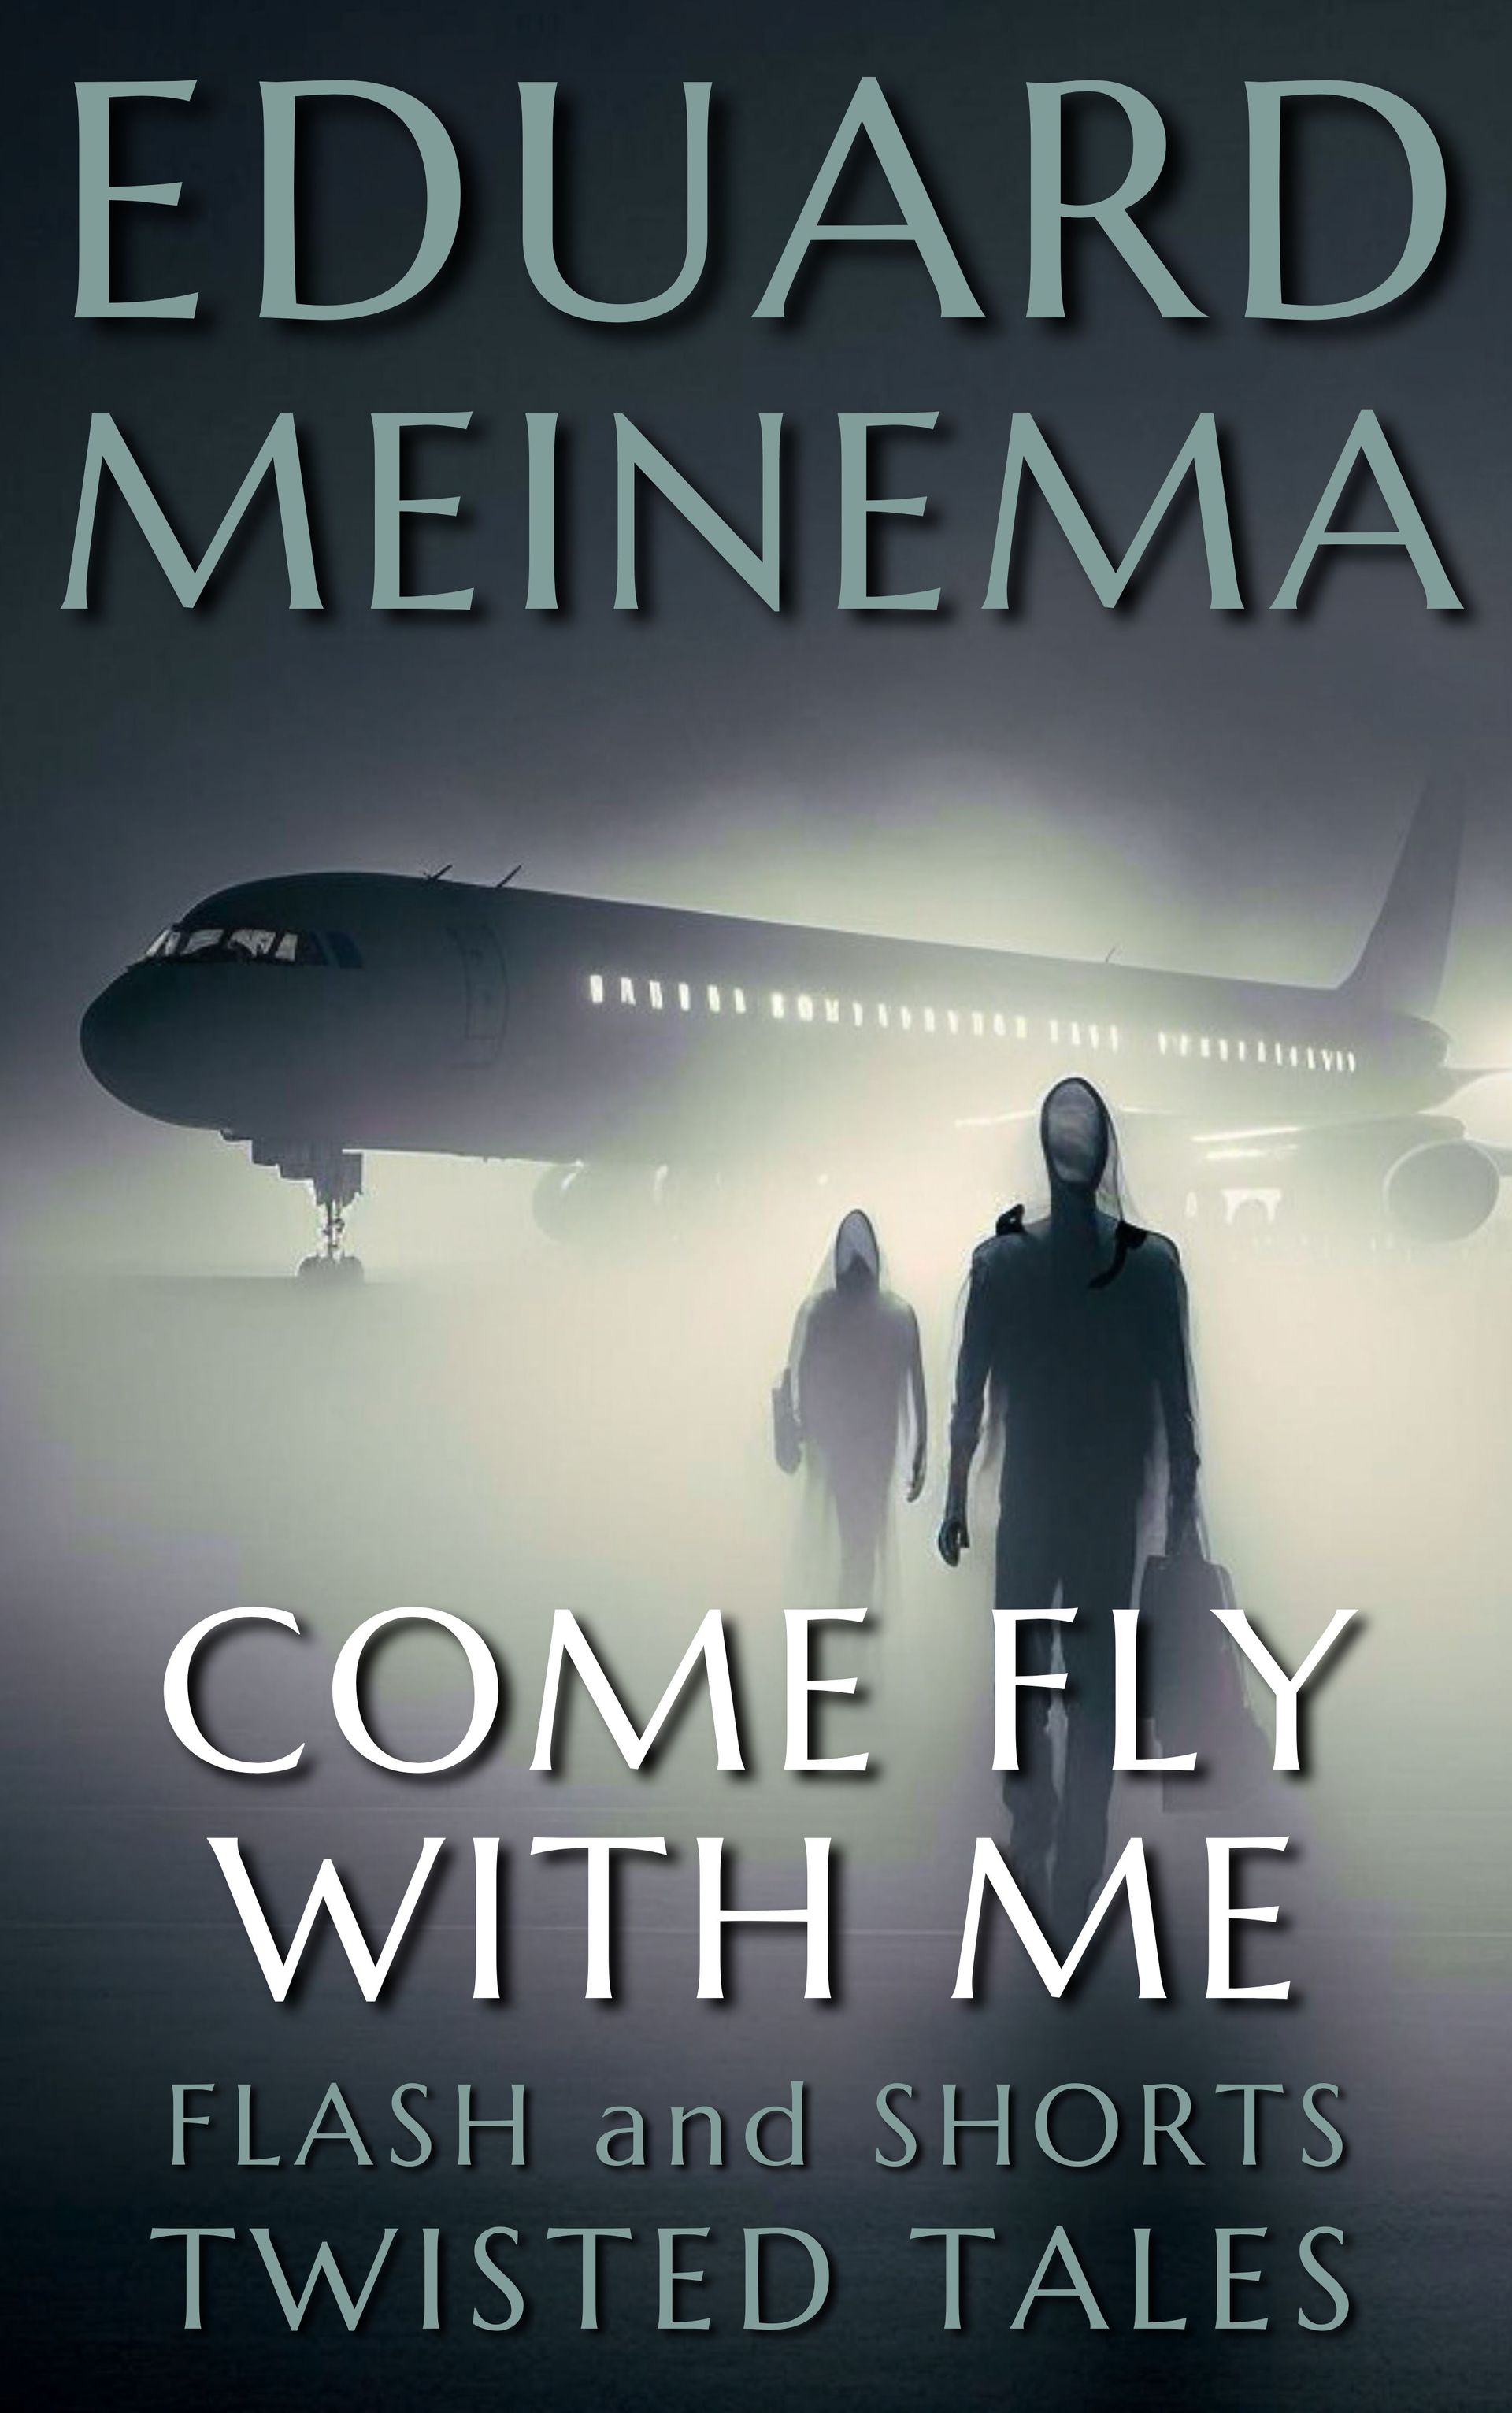 Come fly with me, short story by Eduard Meinema.